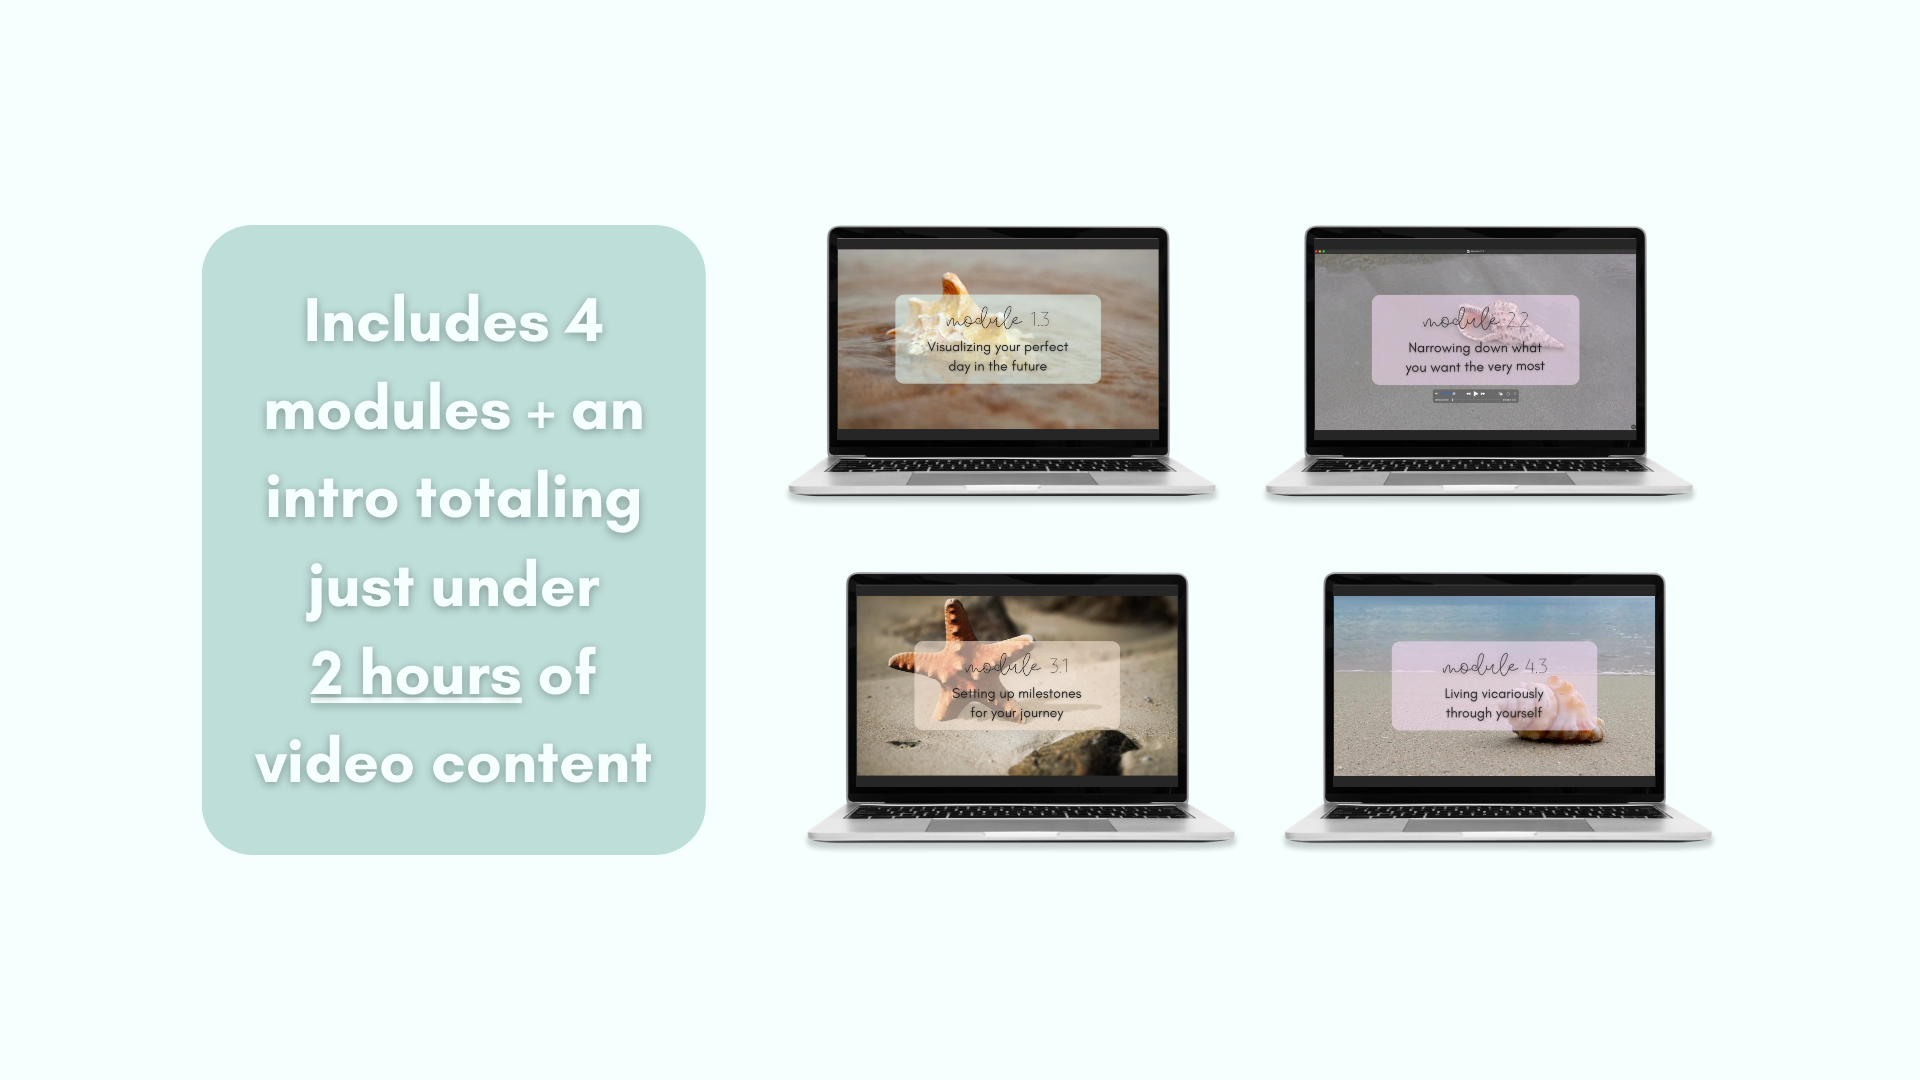 Includes 4 modules and an intro totaling just under 2 hours of video content